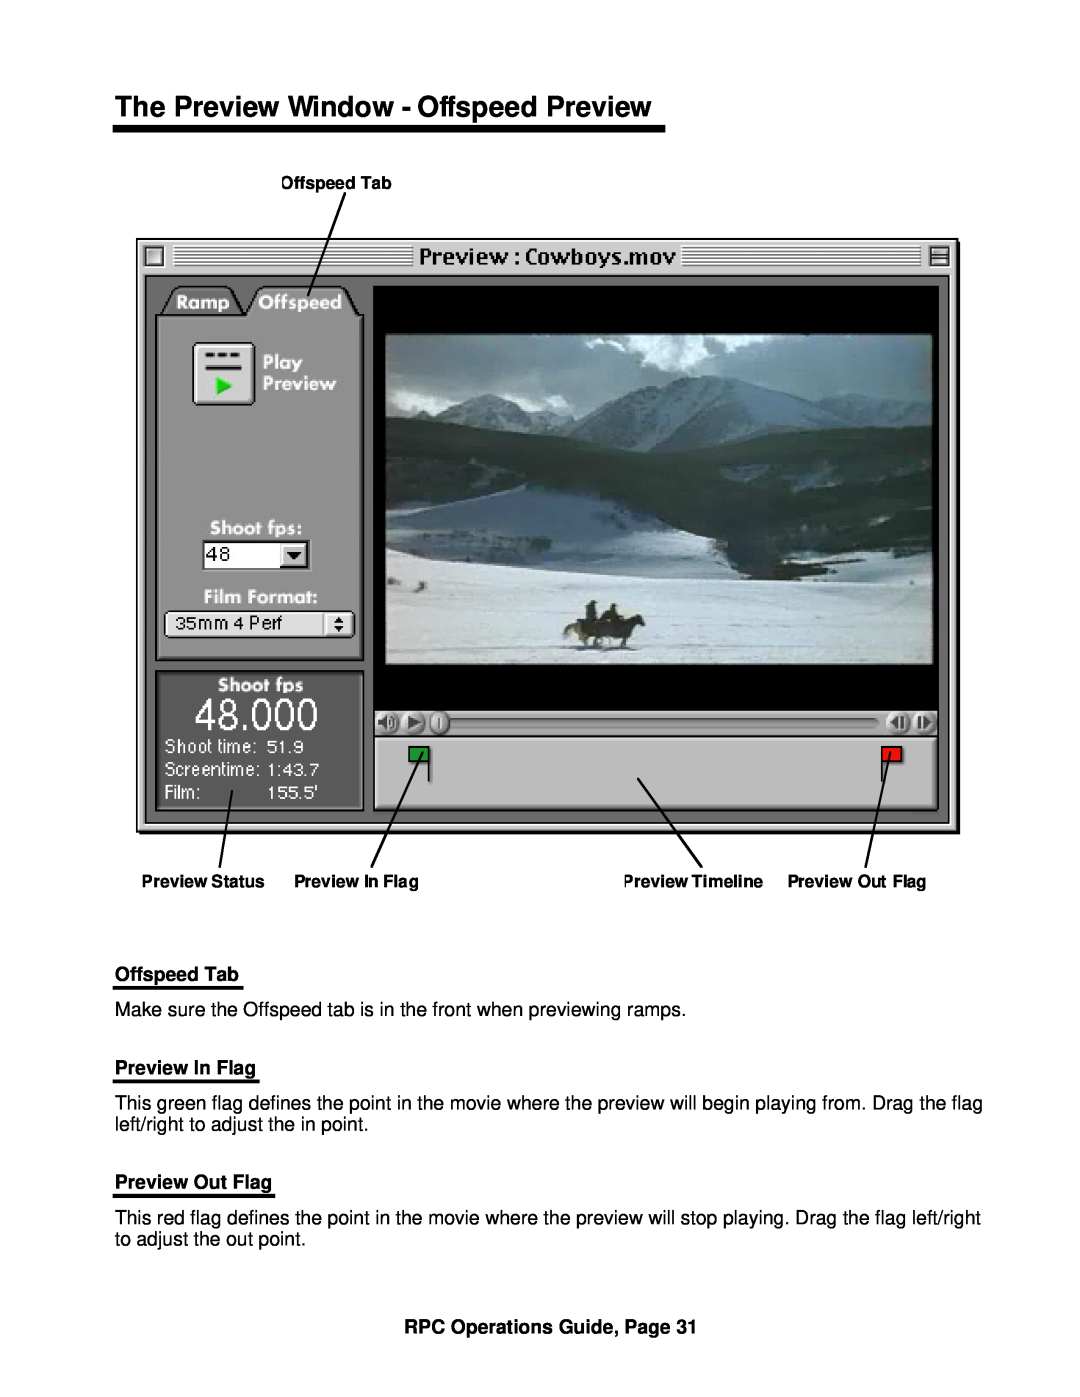 ARRI ARRI Ramp Preview Controller The Preview Window - Offspeed Preview, Offspeed Tab, Preview In Flag, Preview Out Flag 